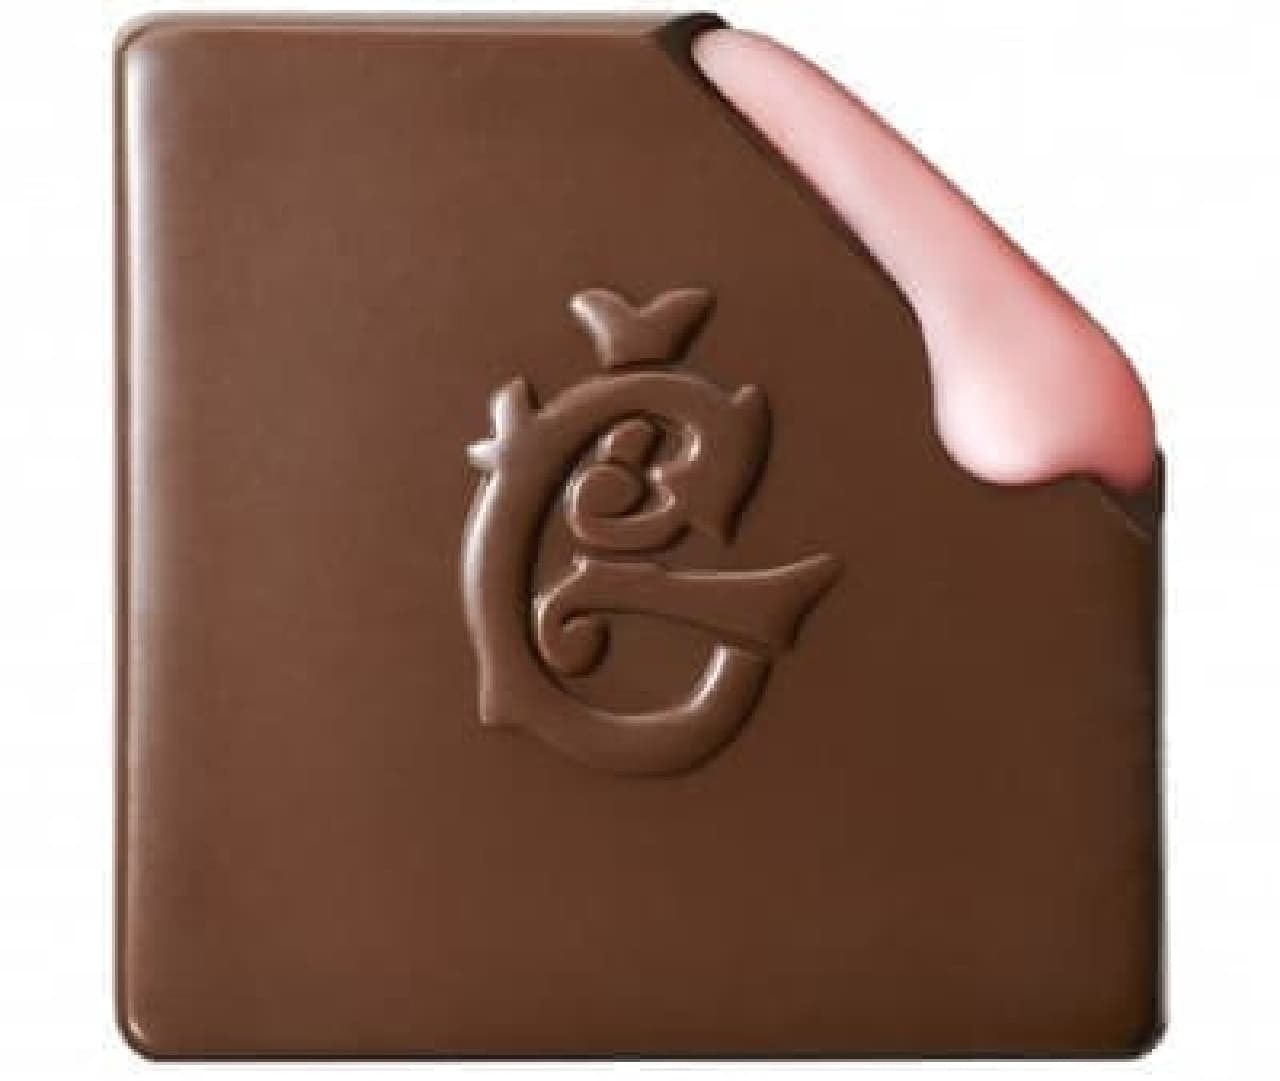 Lotte "Charlotte raw chocolate [Fruy Rouge]"